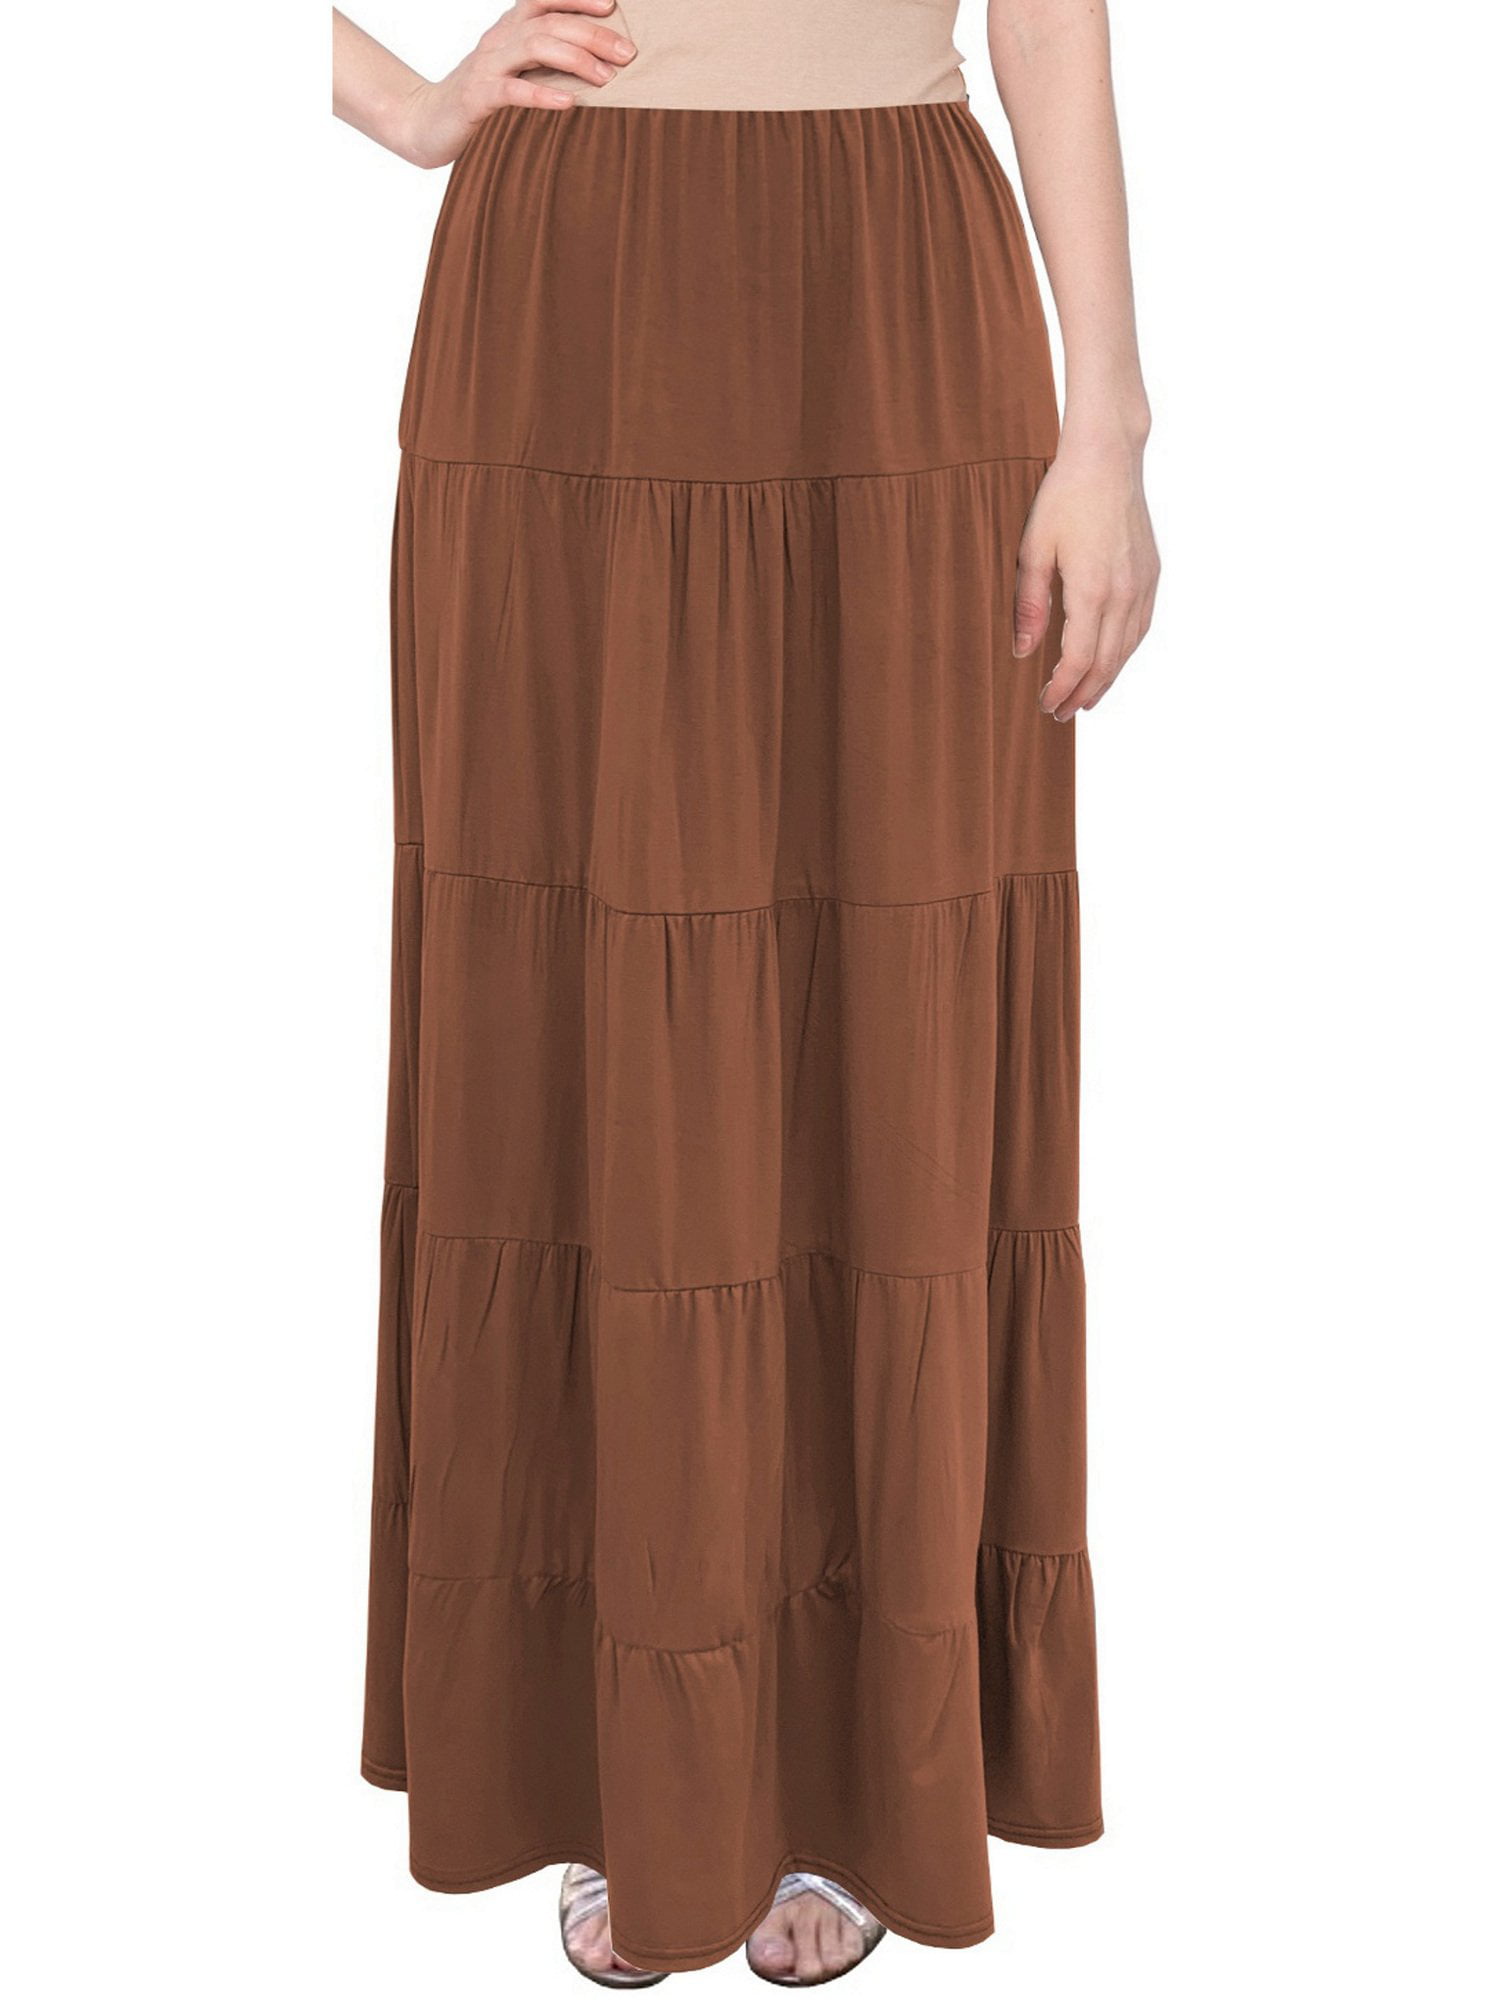 womens tiered maxi skirts